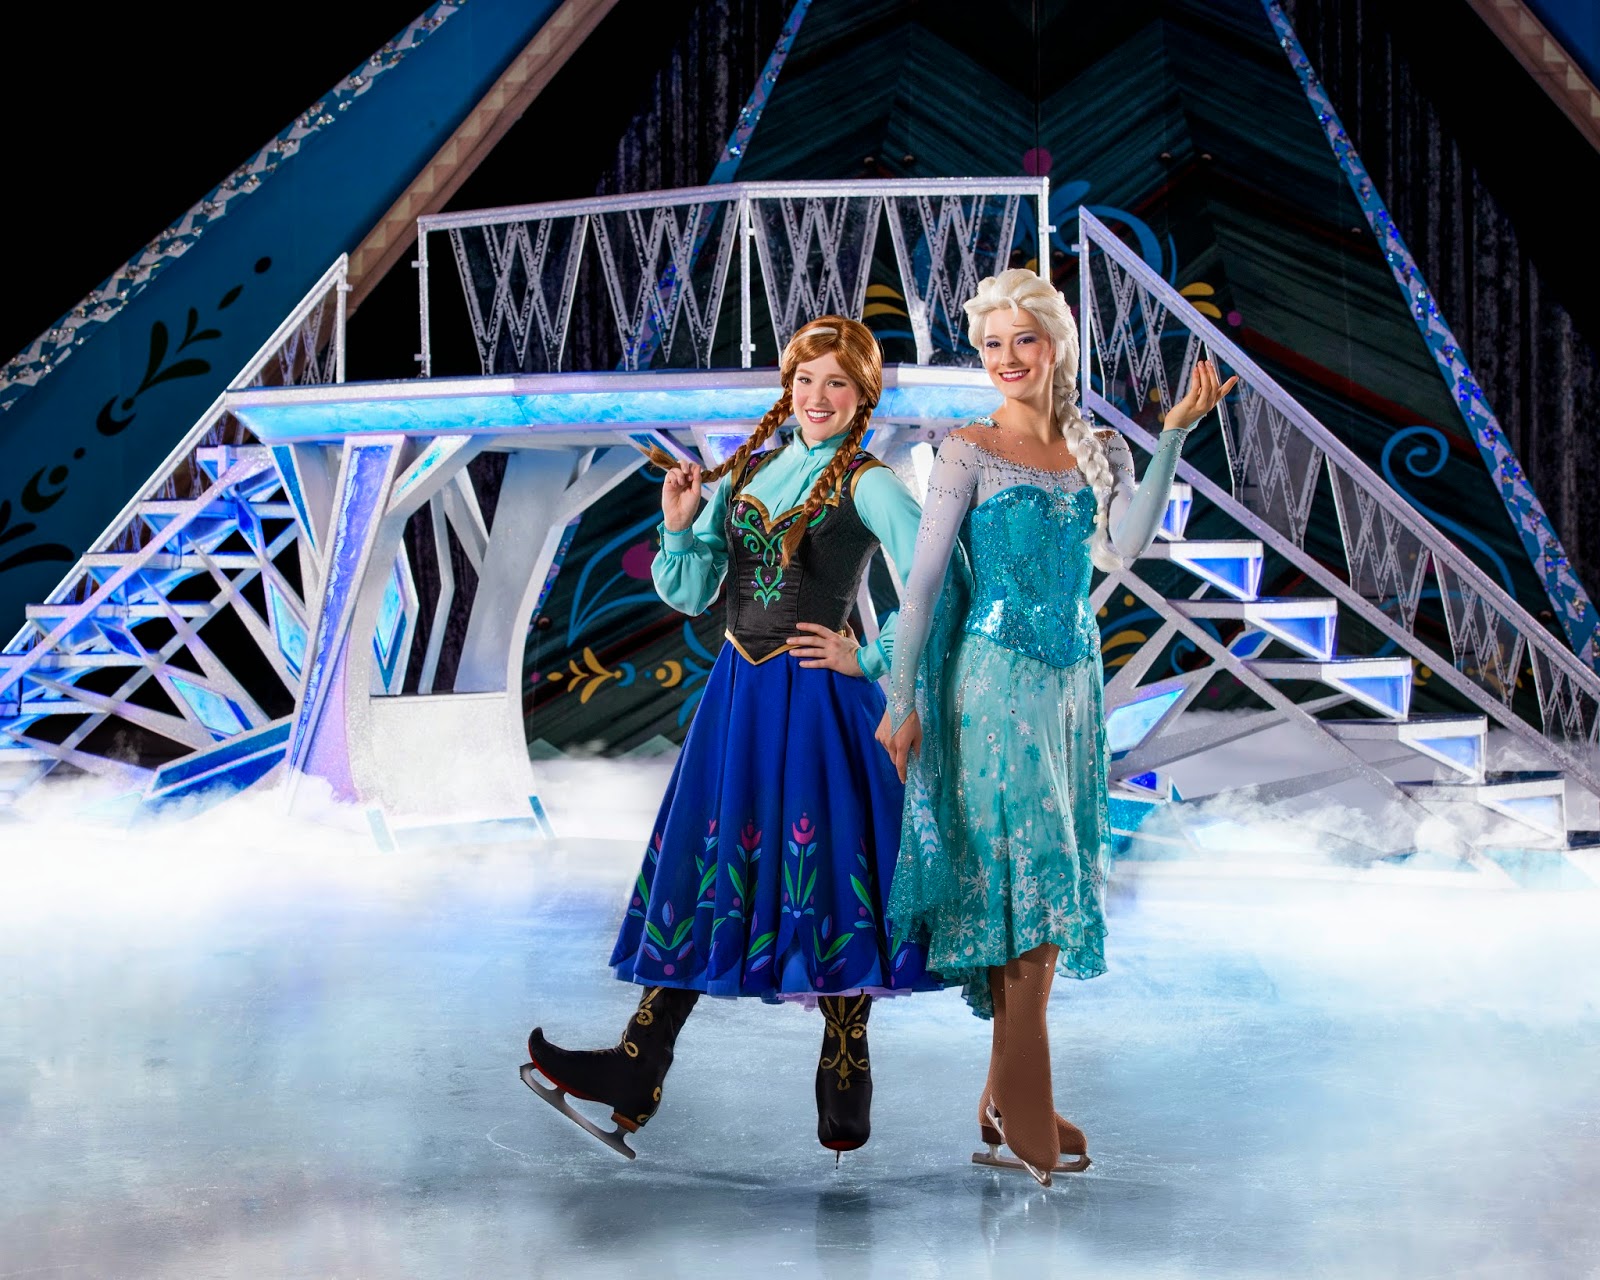 Tickets for Disney on Ice Presents Frozen are Perfect Stocking Stuffers!  #DisneyonIceInsider